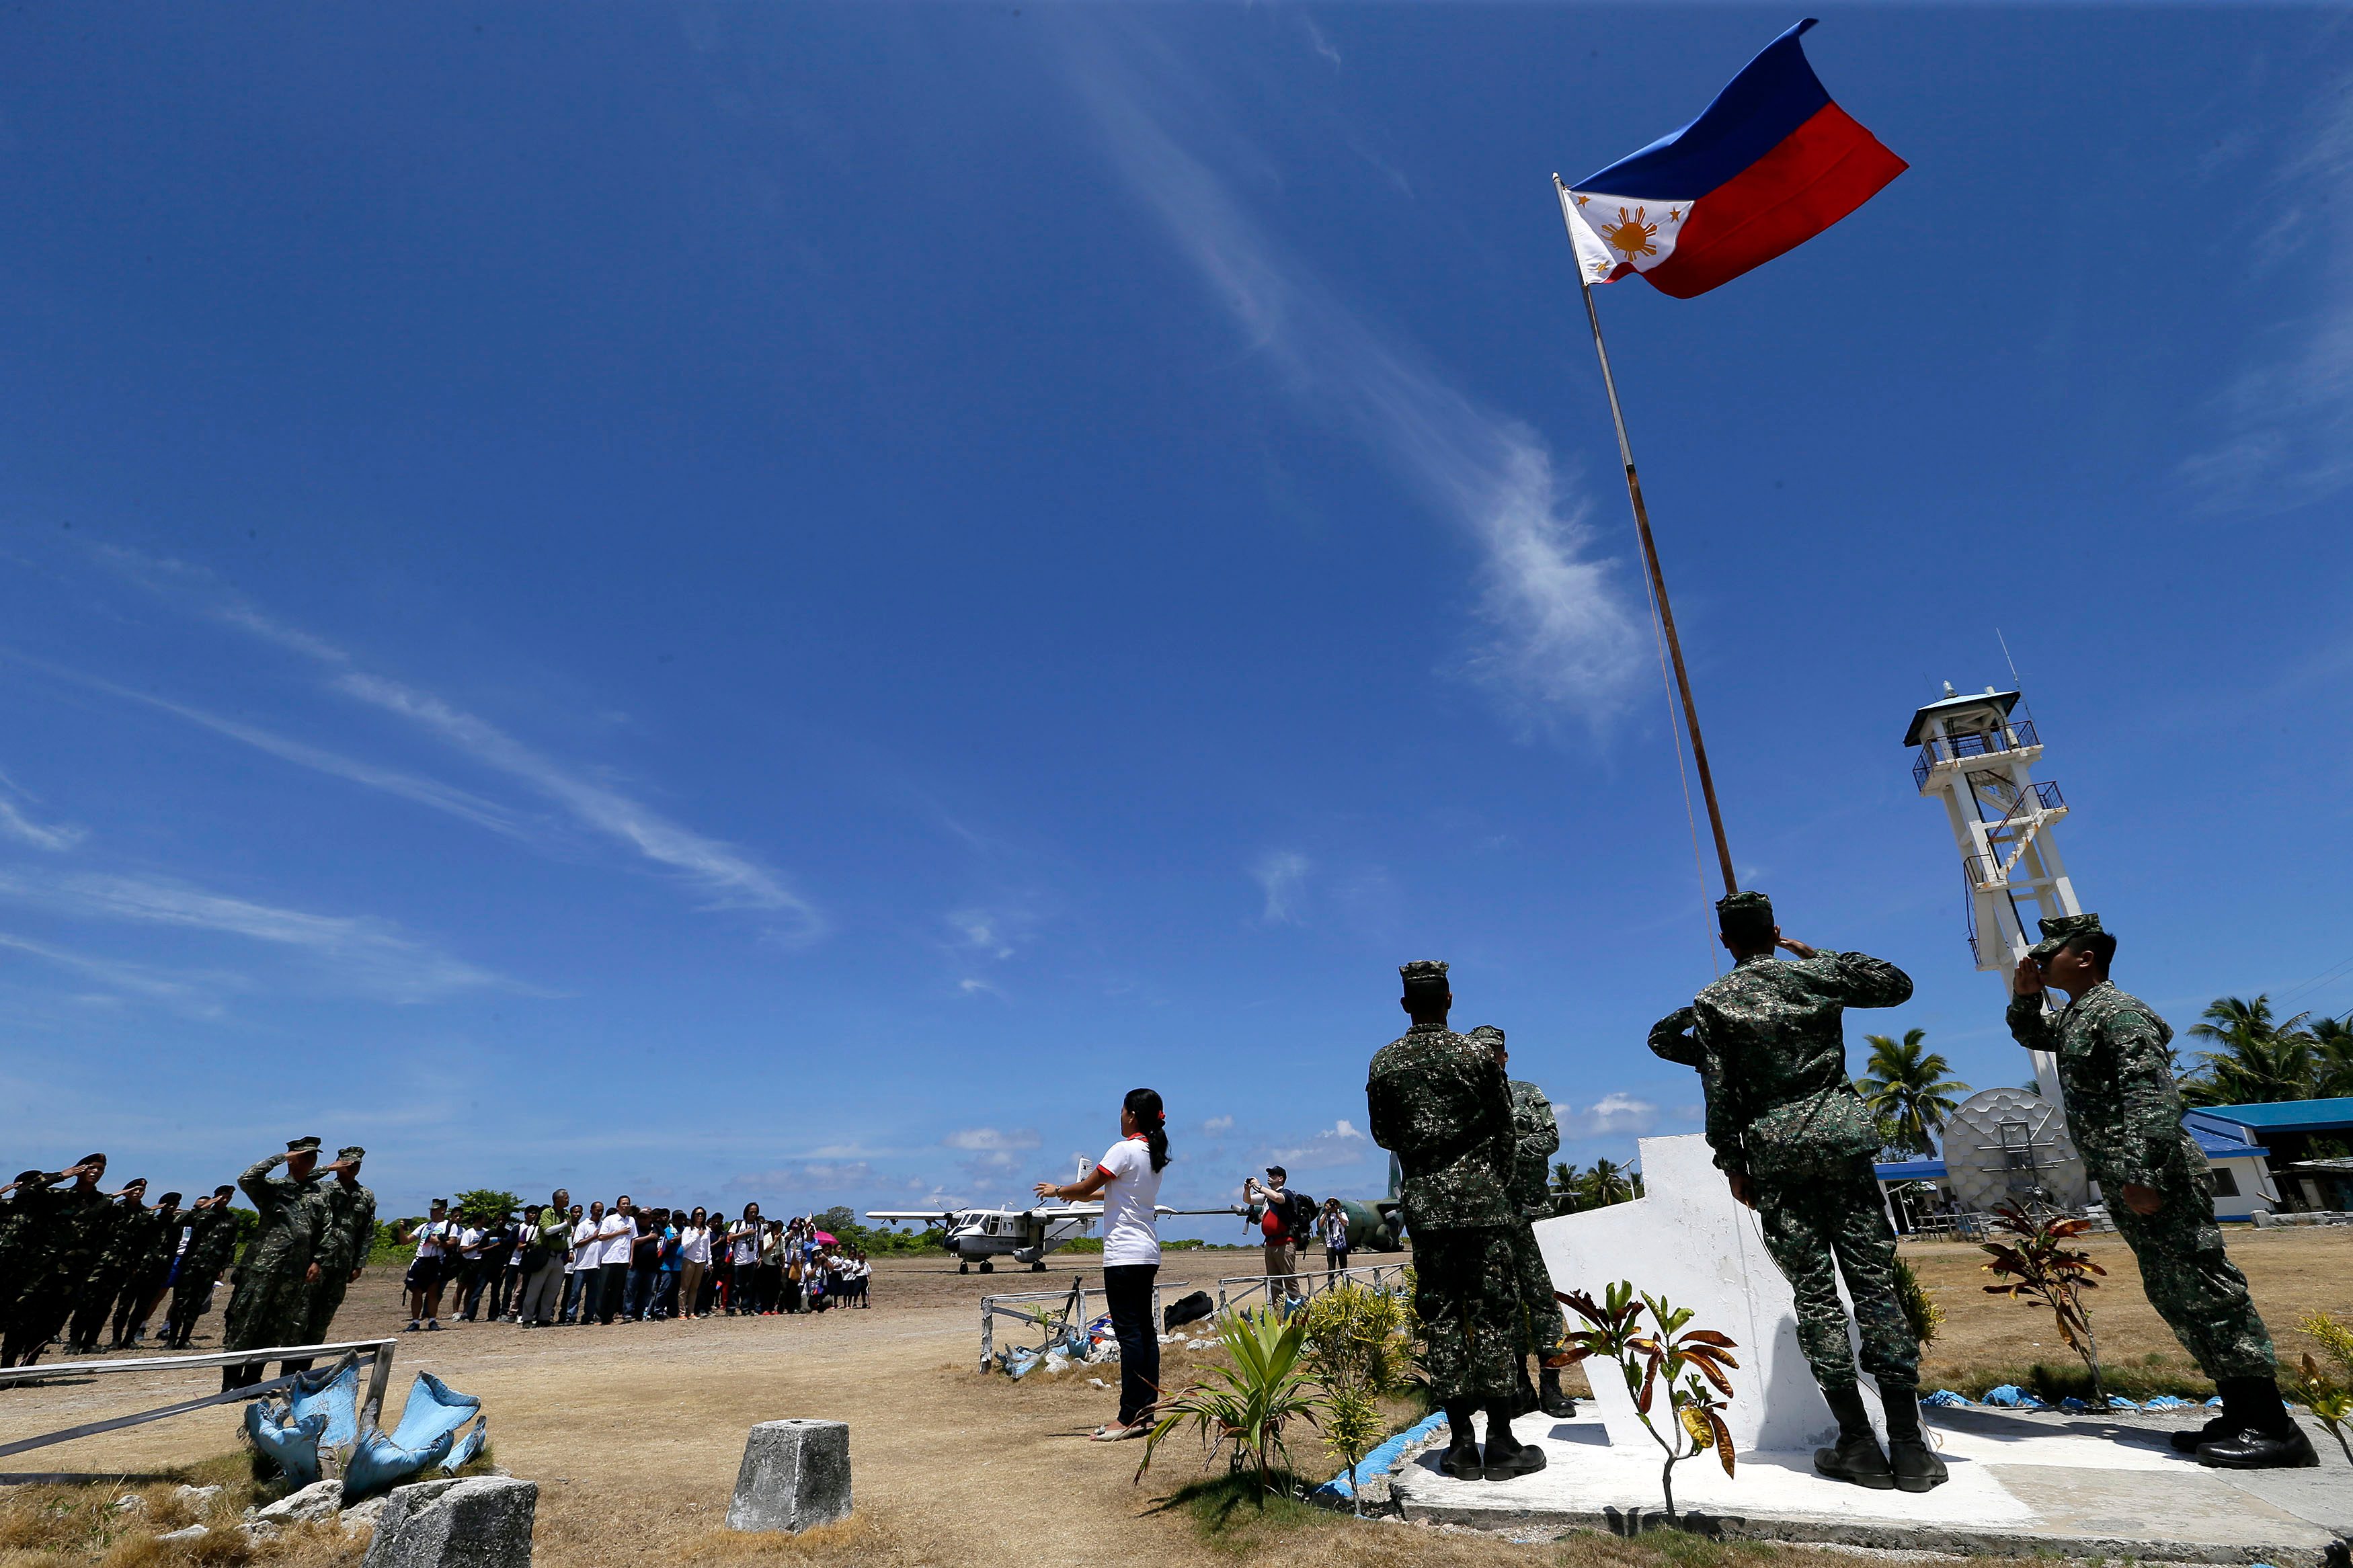 PHILIPPINE FLAG. Filipino residents and soldiers conduct a flag raising ceremony during the visit of Armed Forces of the Philippines military chief General Gregorio Catapang Jr in Pag-asa (Thitu) island on May 11. Photo by Ritchie Tongo/EPA  